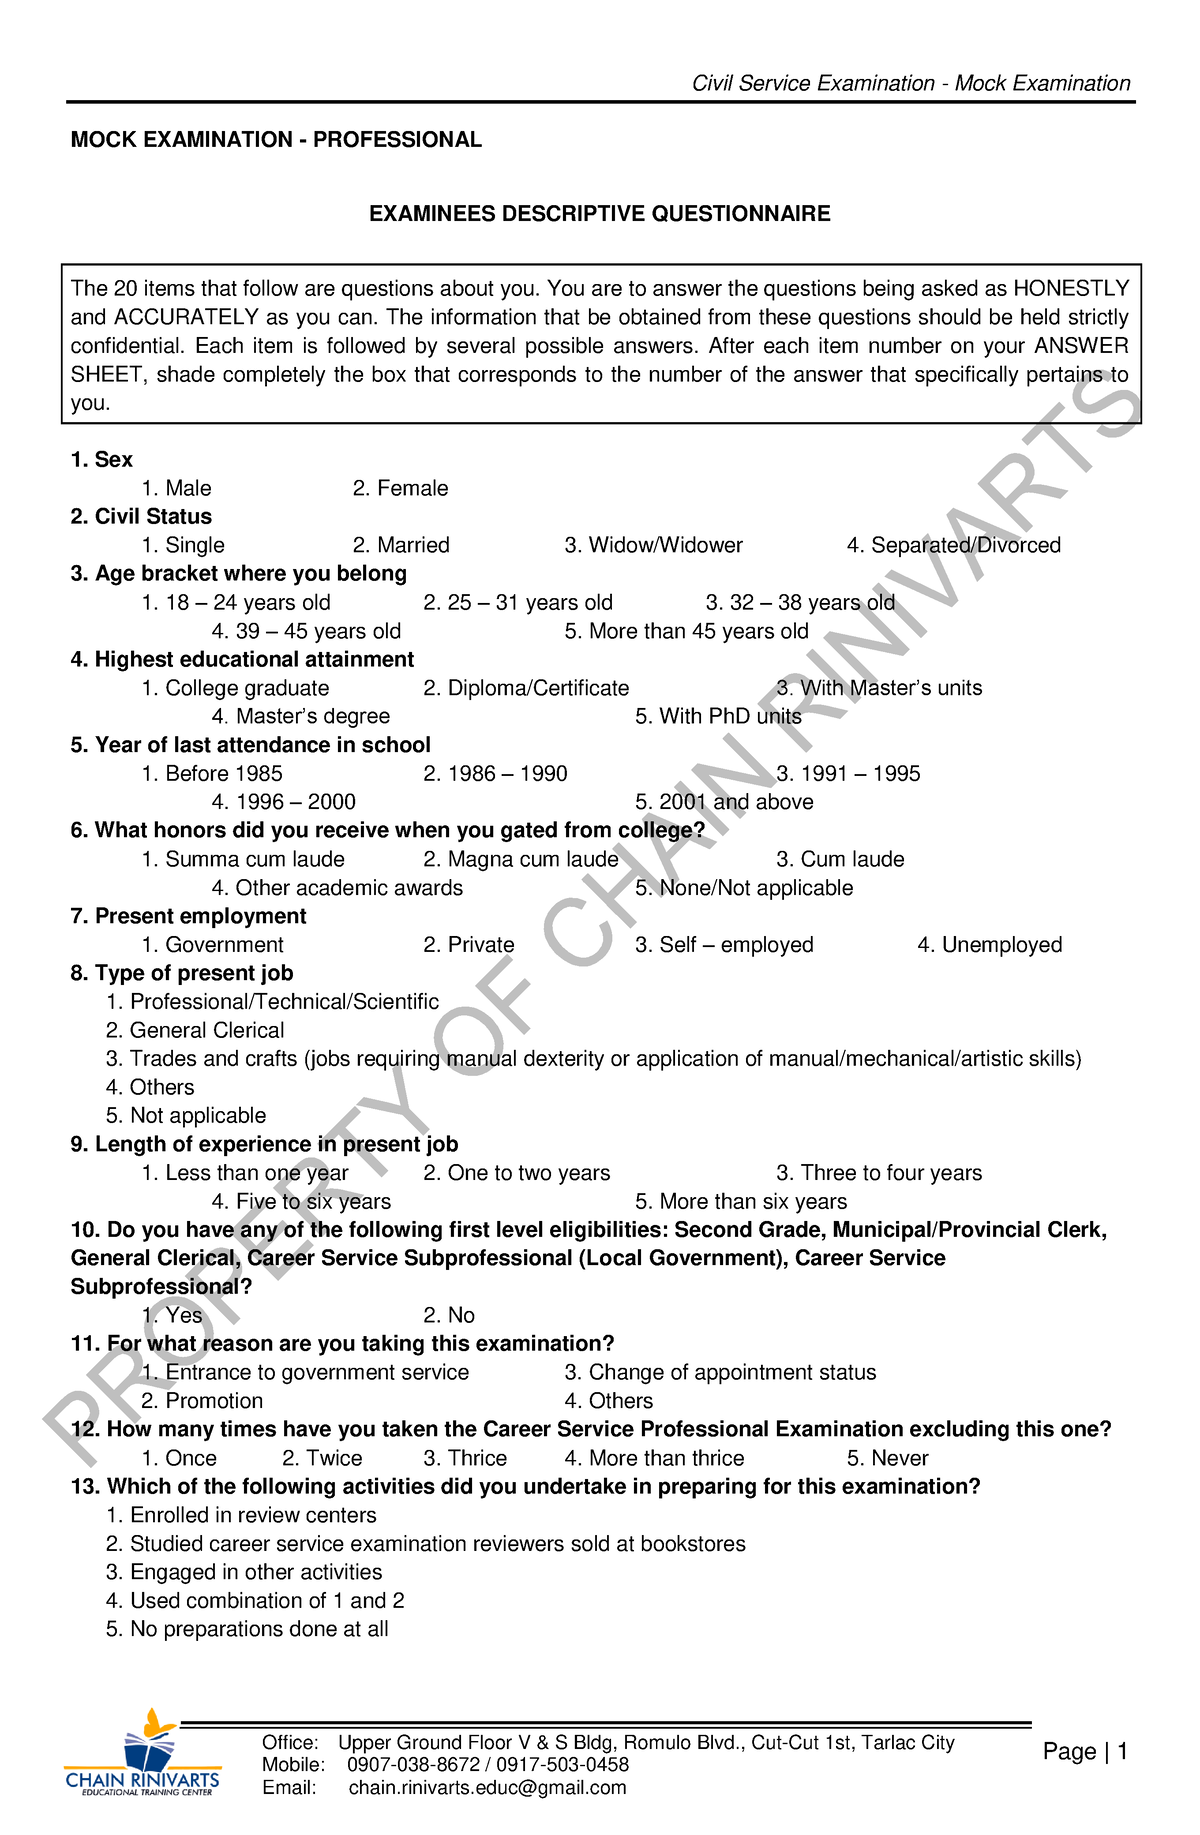 CSC Mock Exam This is a civil service mock exam and it will